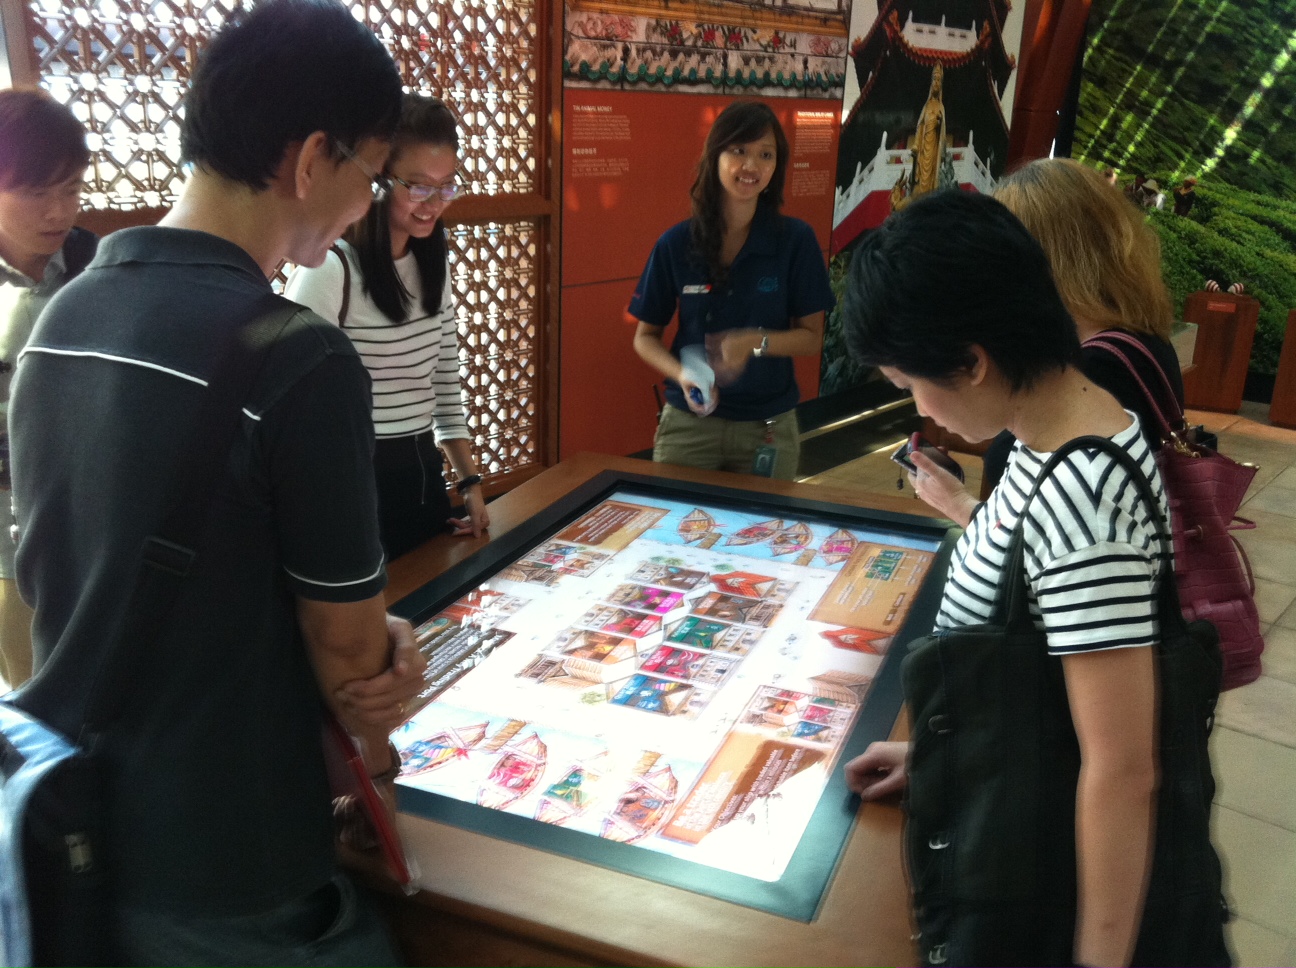 demonstration of the interactive display and its features